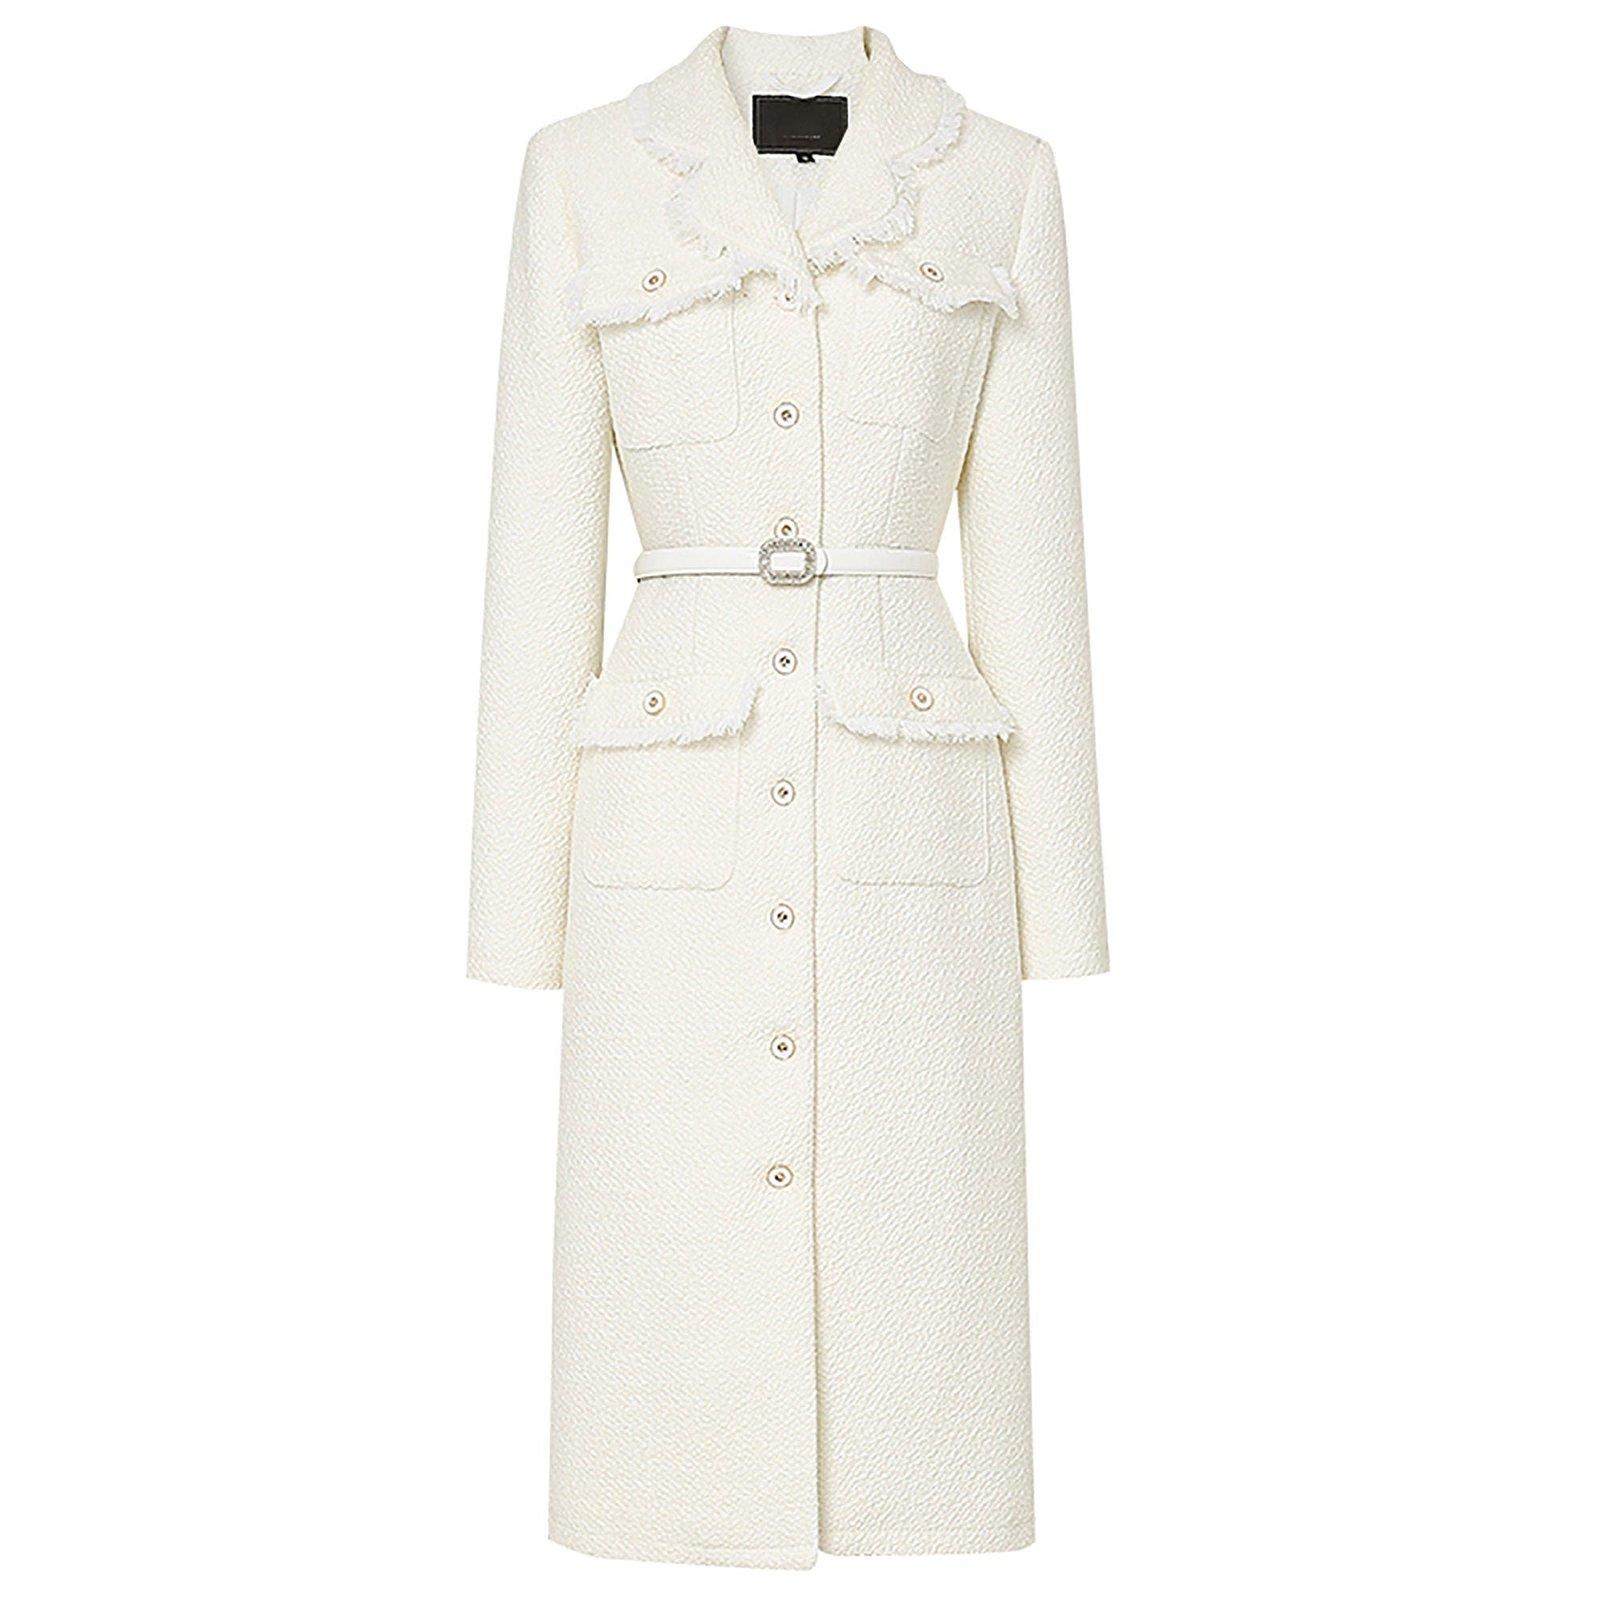 Gucci Women's Single-Breasted Tailored Coat